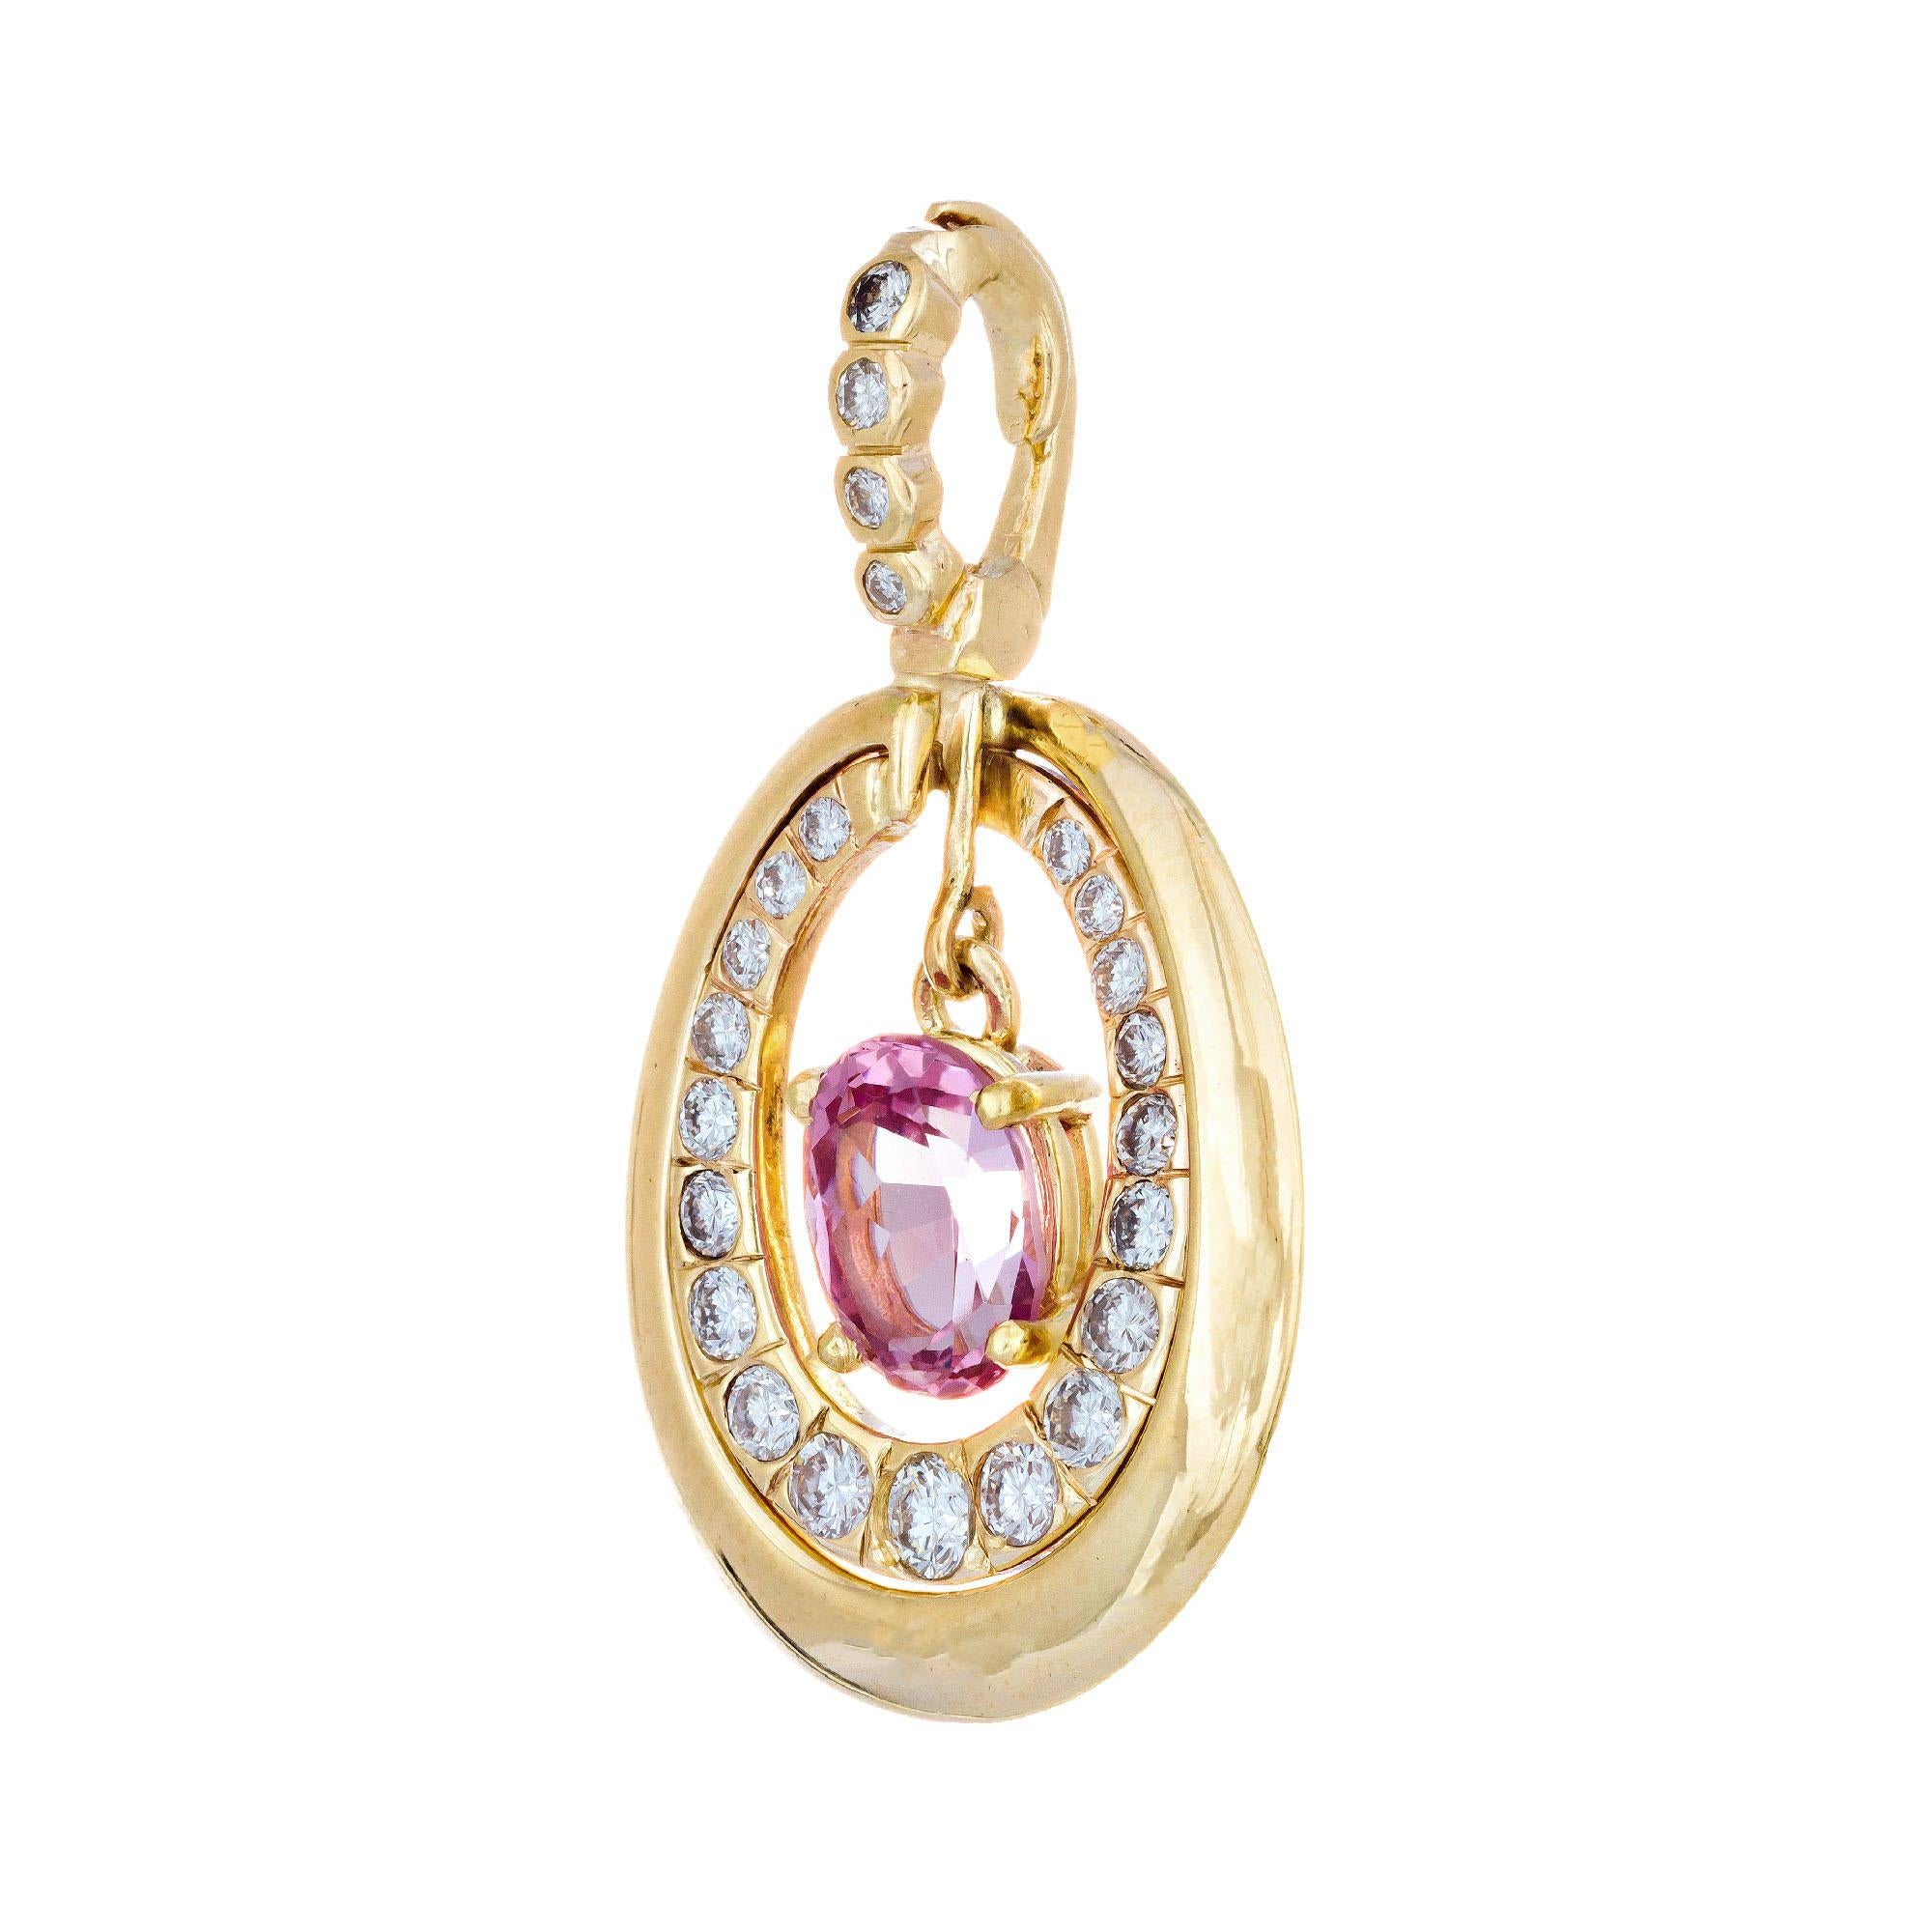 Oval pink spinel dangle center stone. 14k yellow gold pendant with a halo of graduated diamonds. Hinged enhancer bail with four graduated diamonds. 

1 oval natural untreated pink Spinel, approx. total weight 1.50cts, VS2, 8.25 x 6.10 x 4.45mm, GIA